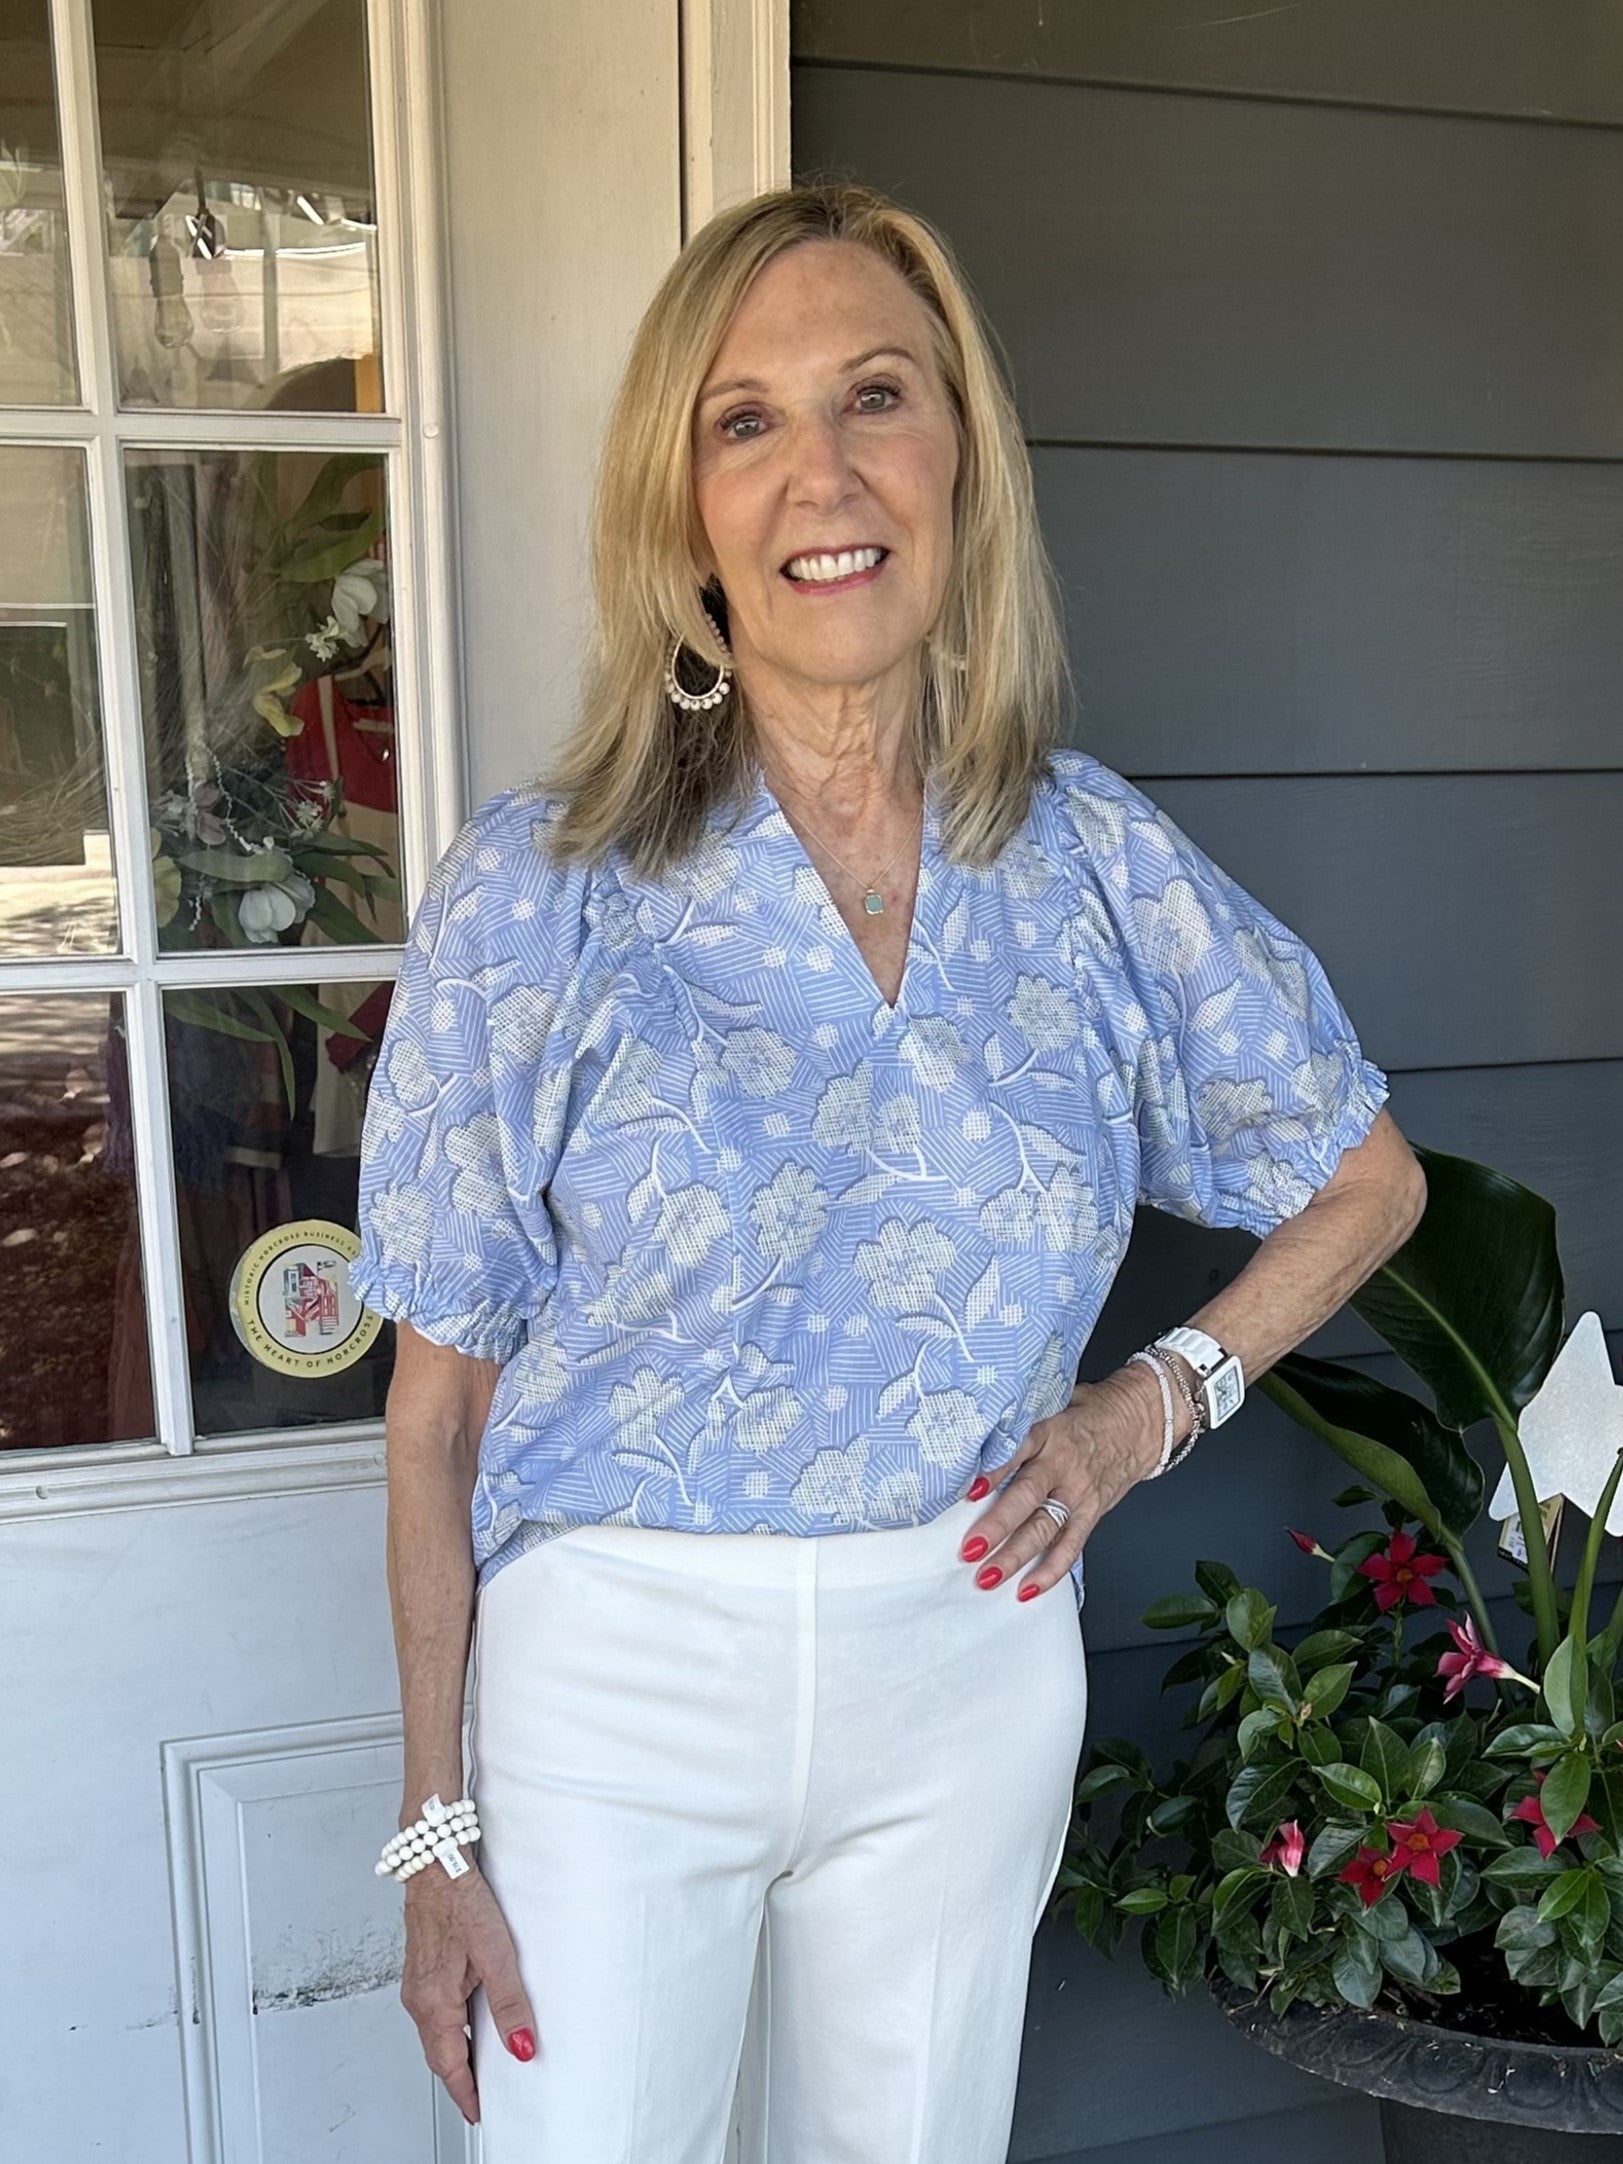 Add a touch of subtle blue to your spring/summer wardrobe with our beautiful Puff Sleeve Flower Print Top! Featuring a flattering V-neck, ruffled collar, and puffed sleeves with elastic band, this top is perfect for any occasion. Pair it with your favorite white shorts, skirt or pants for a stylish and effortless look.  Material: 100% Polyester  Care Instructions: Gentle cool hand wash, dry flat